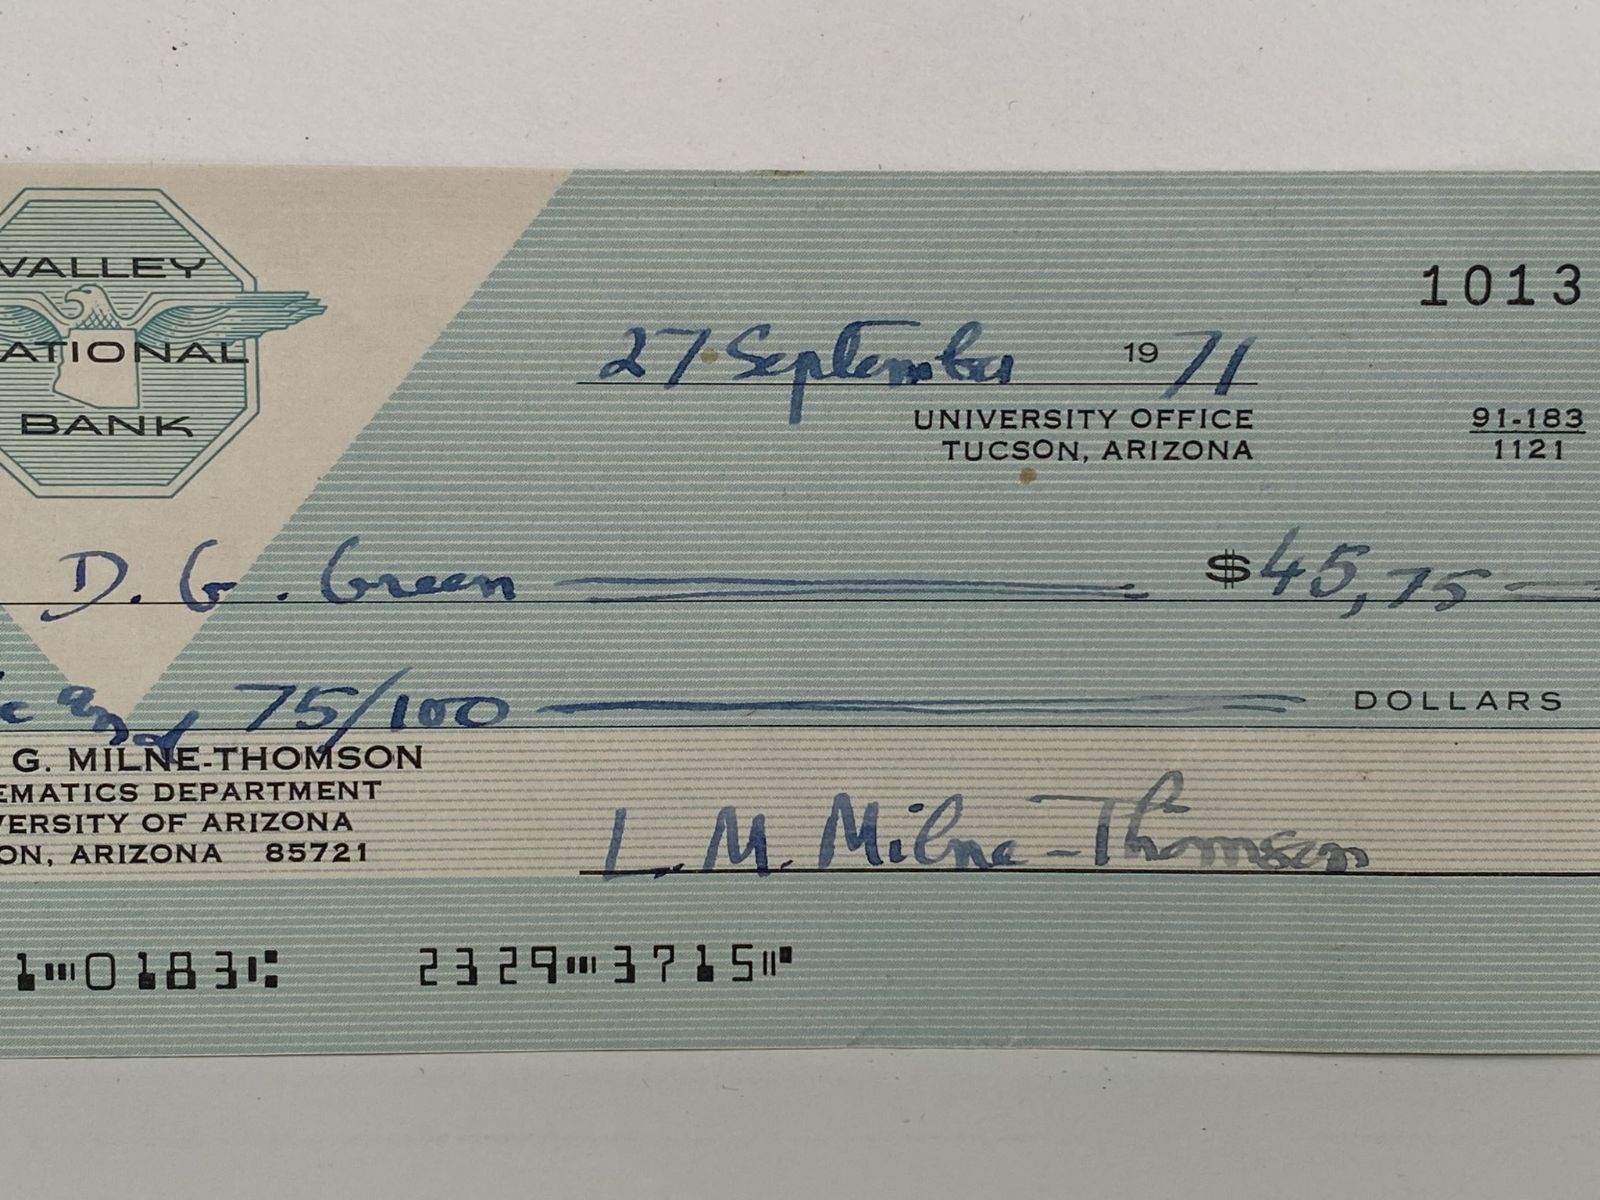 OLD BANKING MEMORABILIA: Bank cheque from Valley National Bank, Arizona 1971